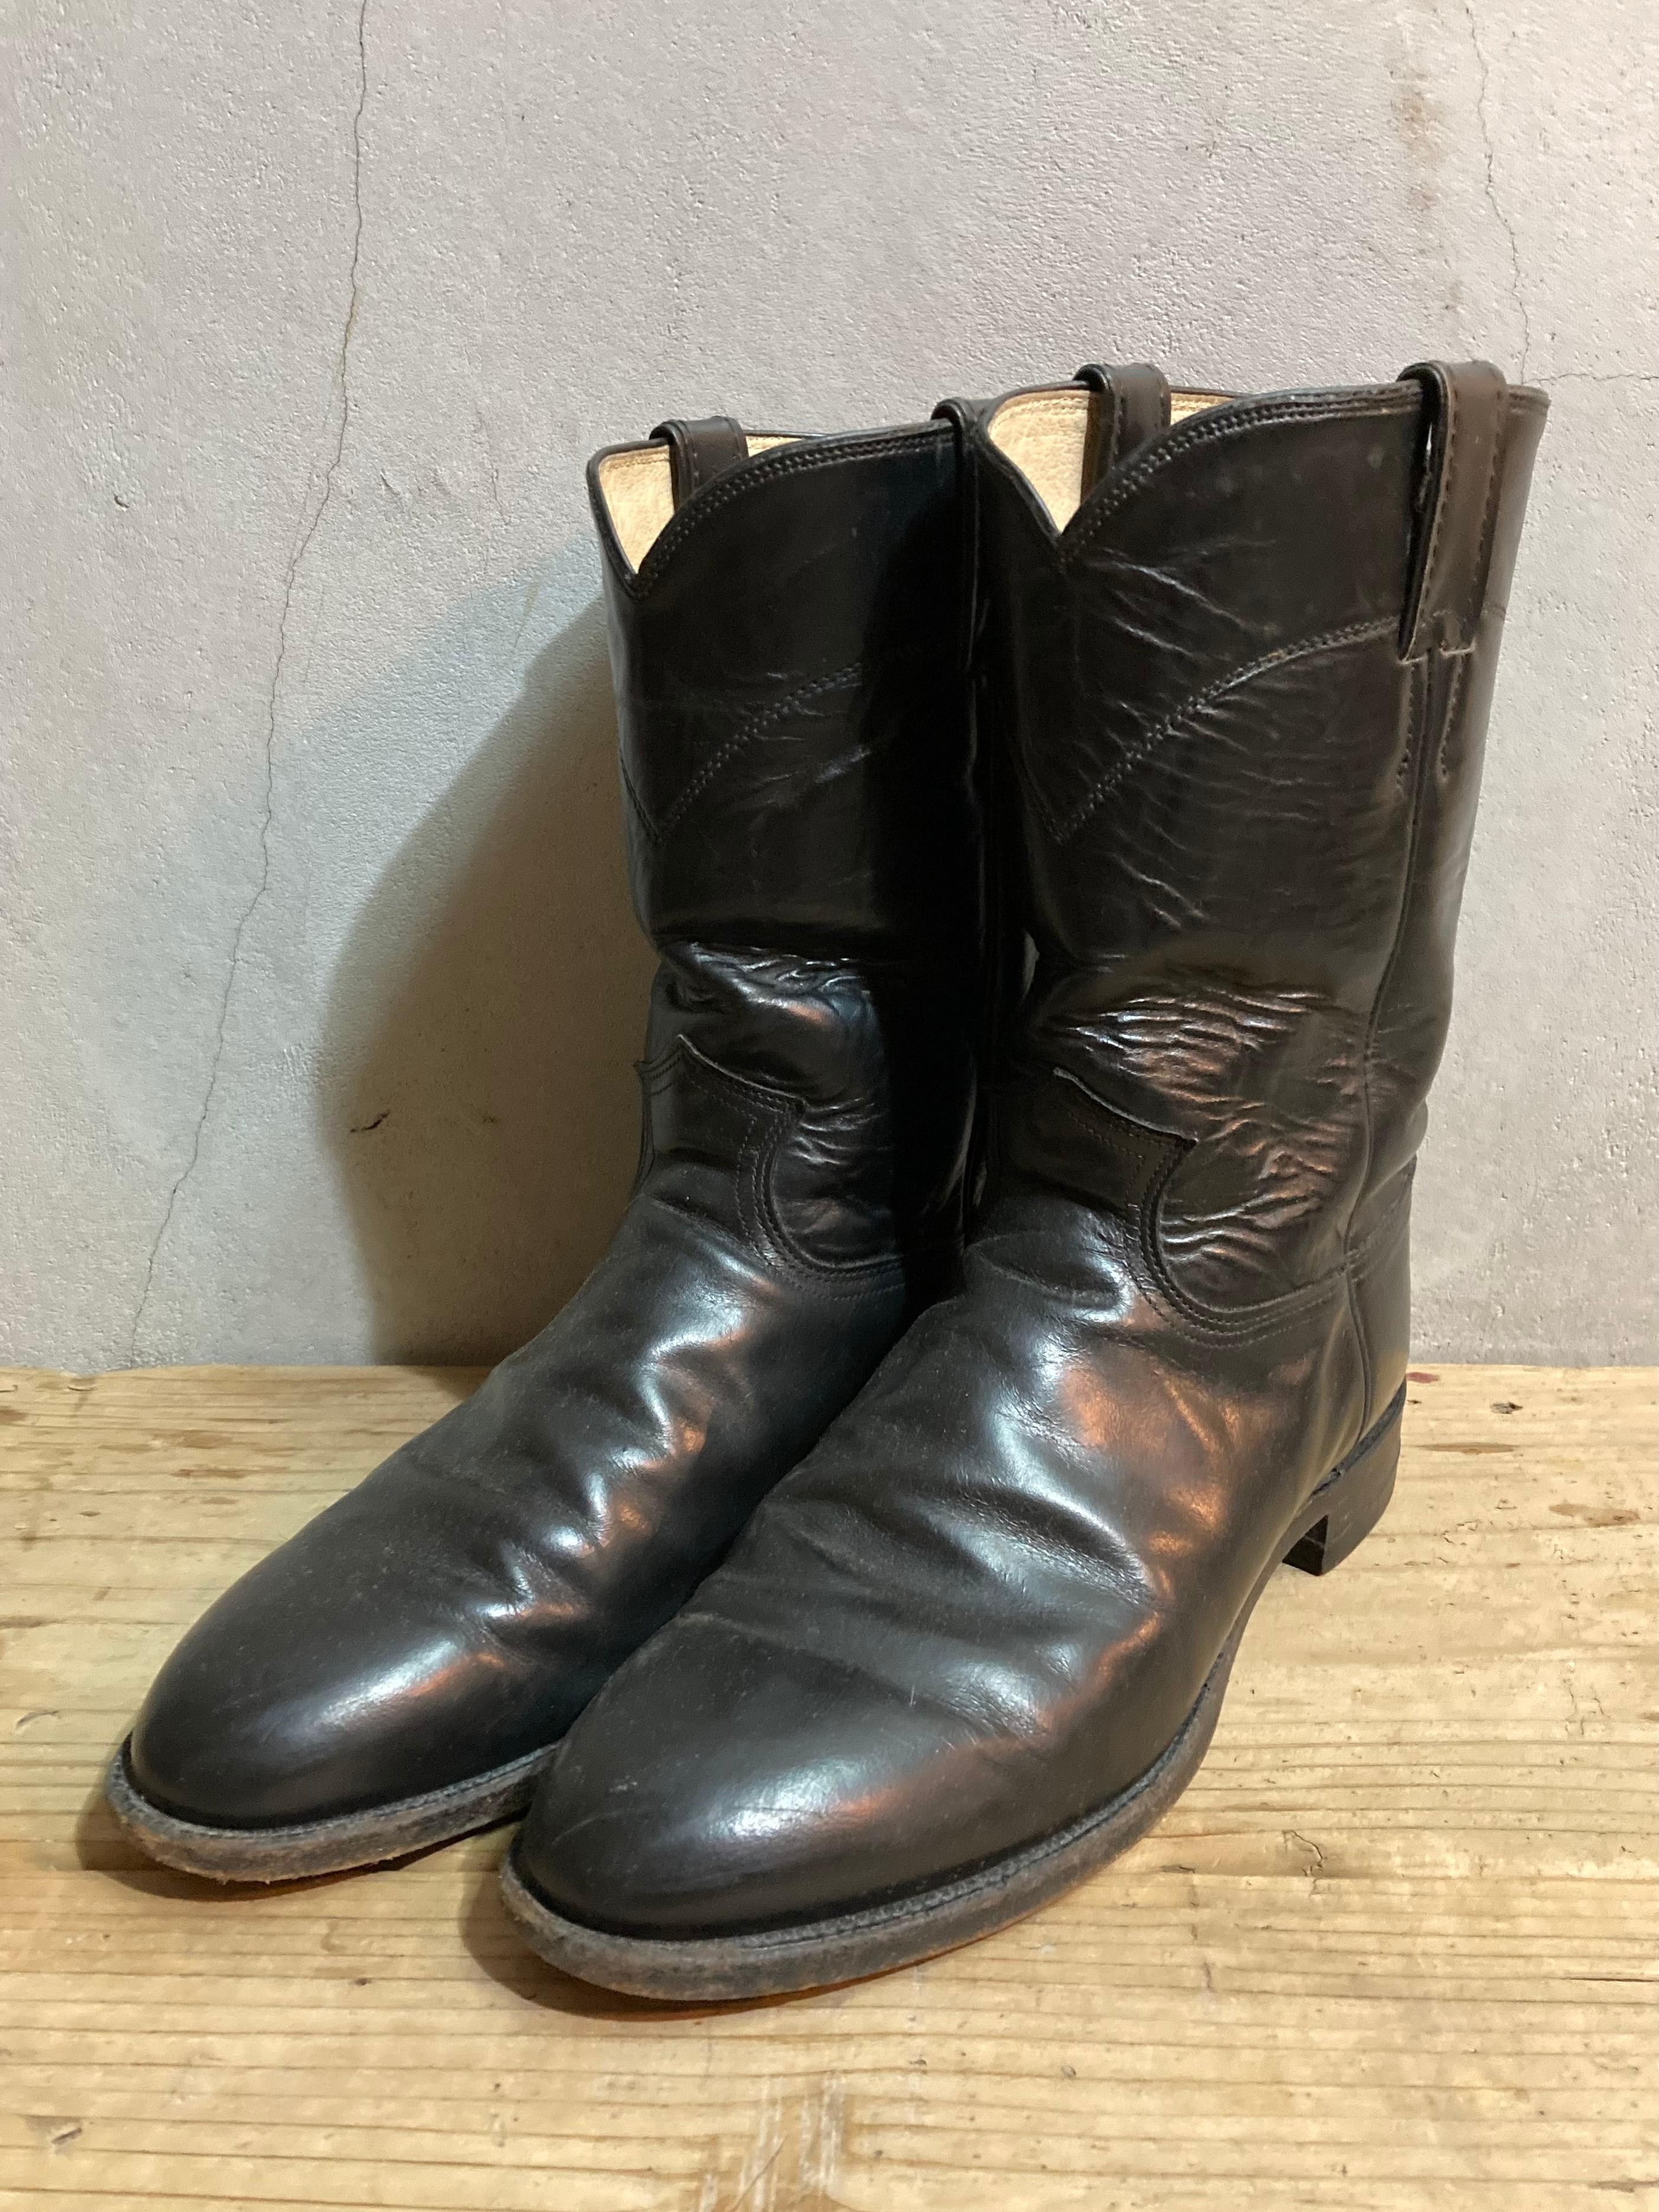 VINTAGE MENS PECOS BOOTS (beady clothing)